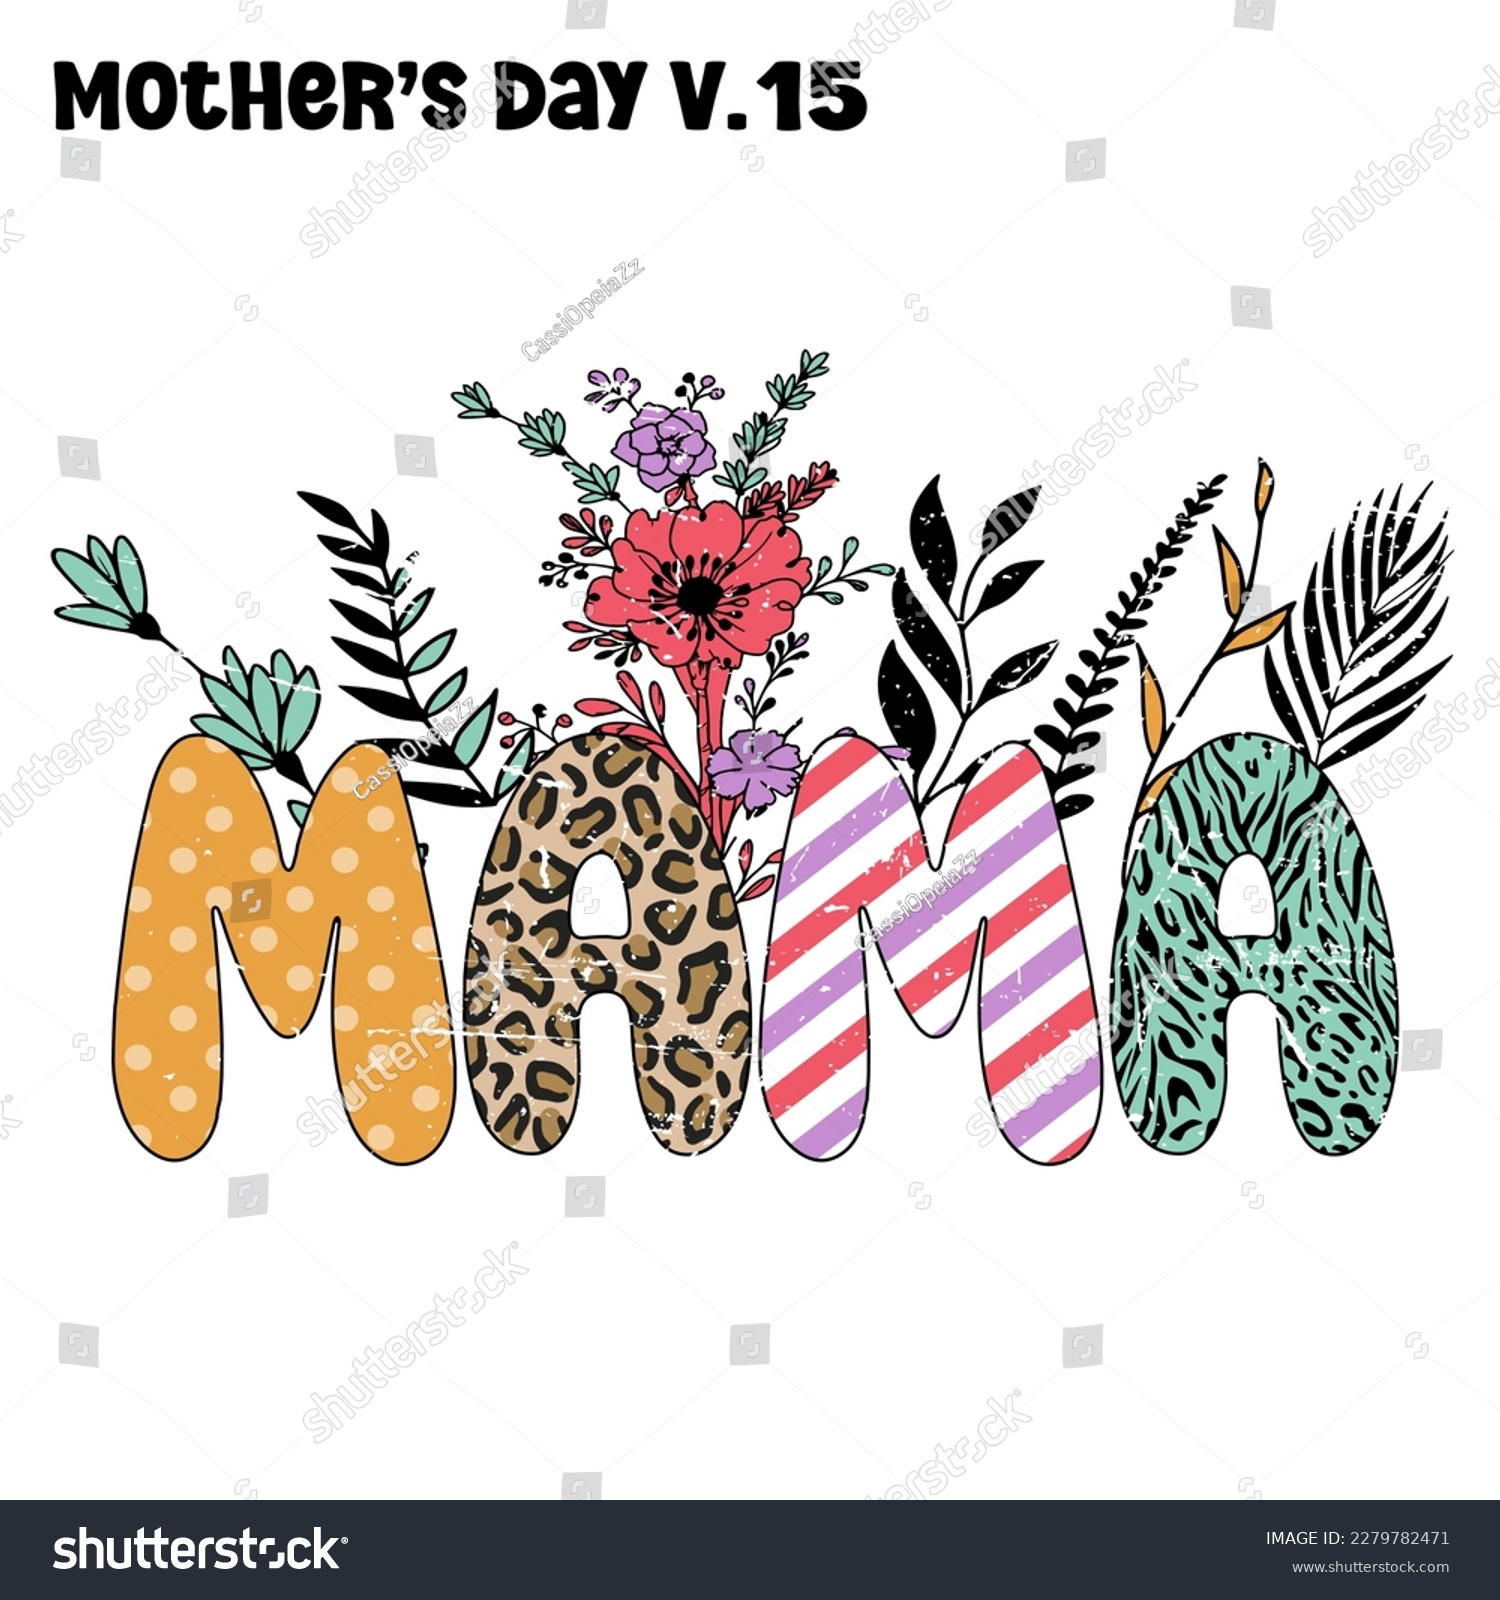 SVG of MAMA flowers , Mother's day V.15 , MAMA lettering with Flowers and Leopard zebra Background Colorful 70's 80's 90's Retro style texture EPS. Vector file design for t-shirt svg